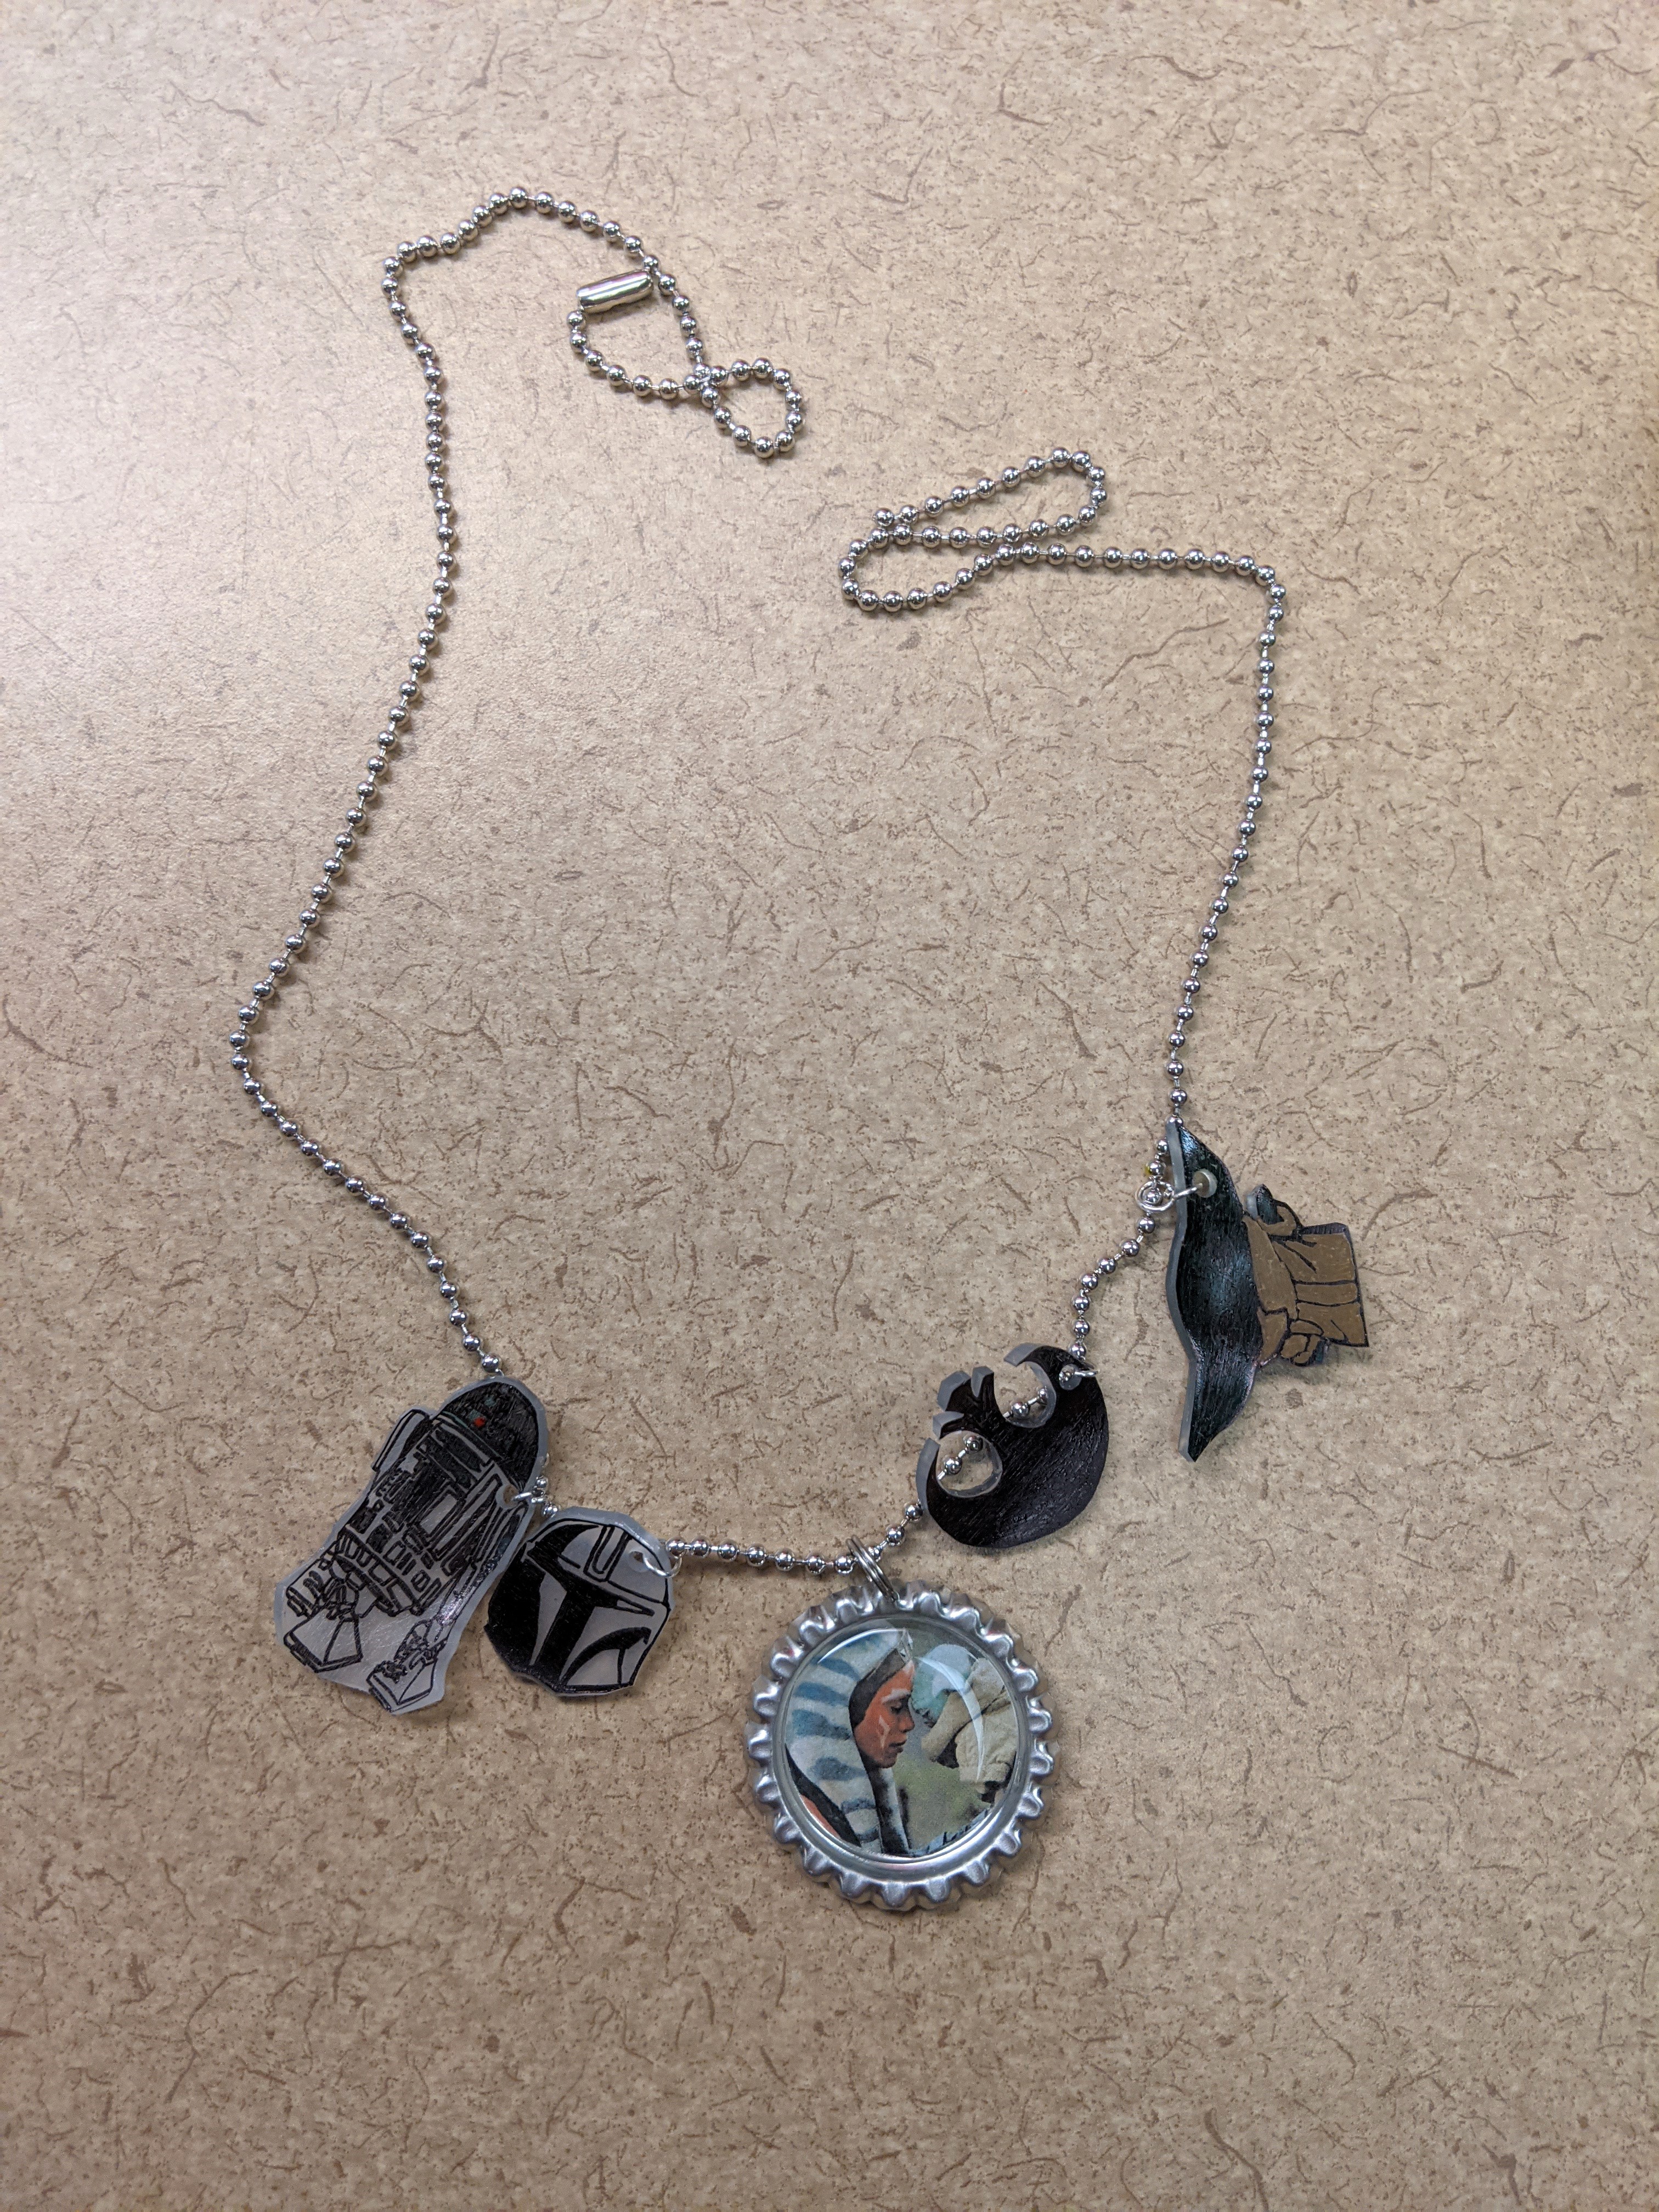 Bottlecap necklace with shrinky dinks attached